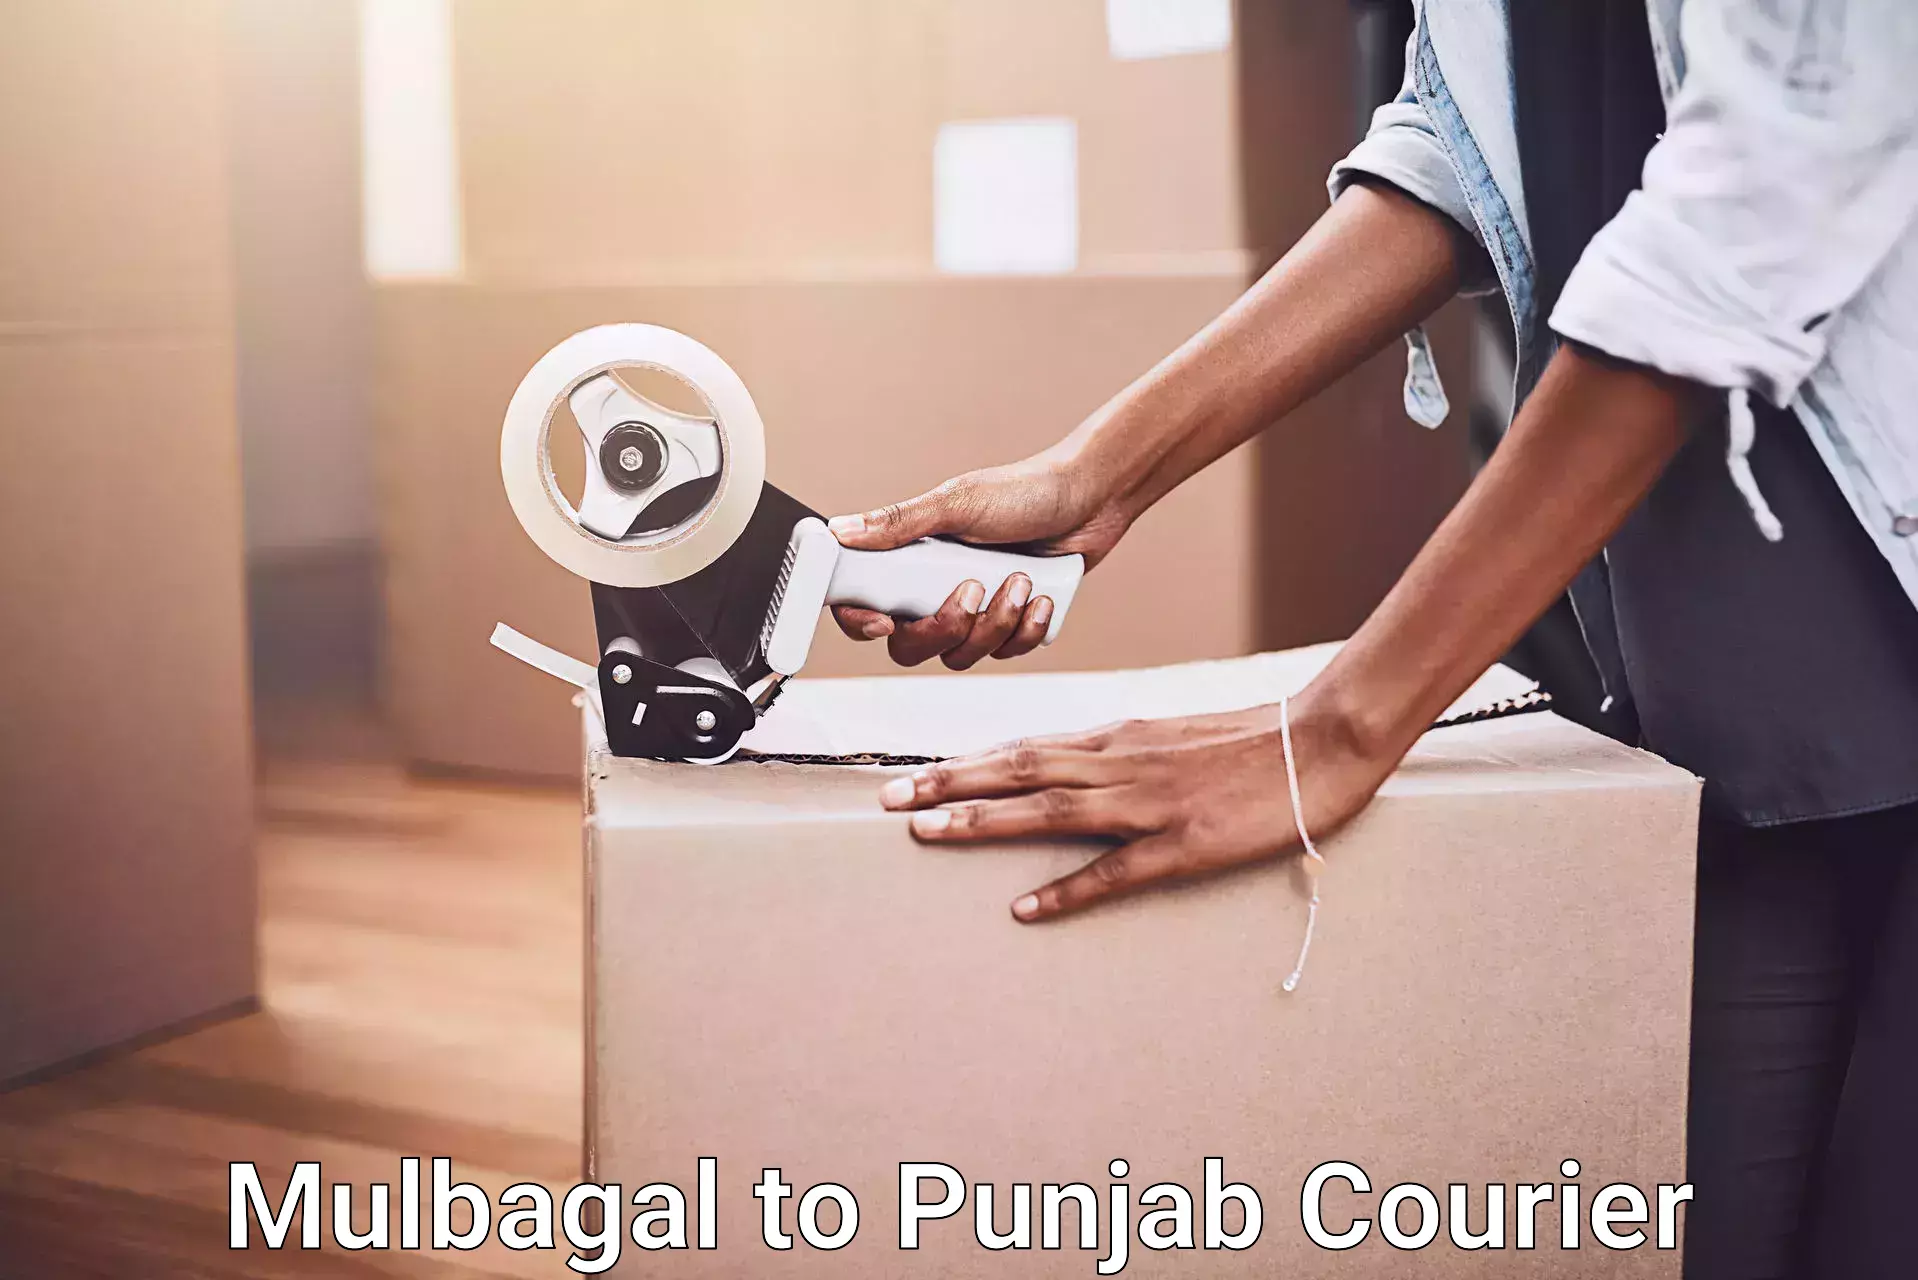 Furniture delivery service in Mulbagal to Ajnala